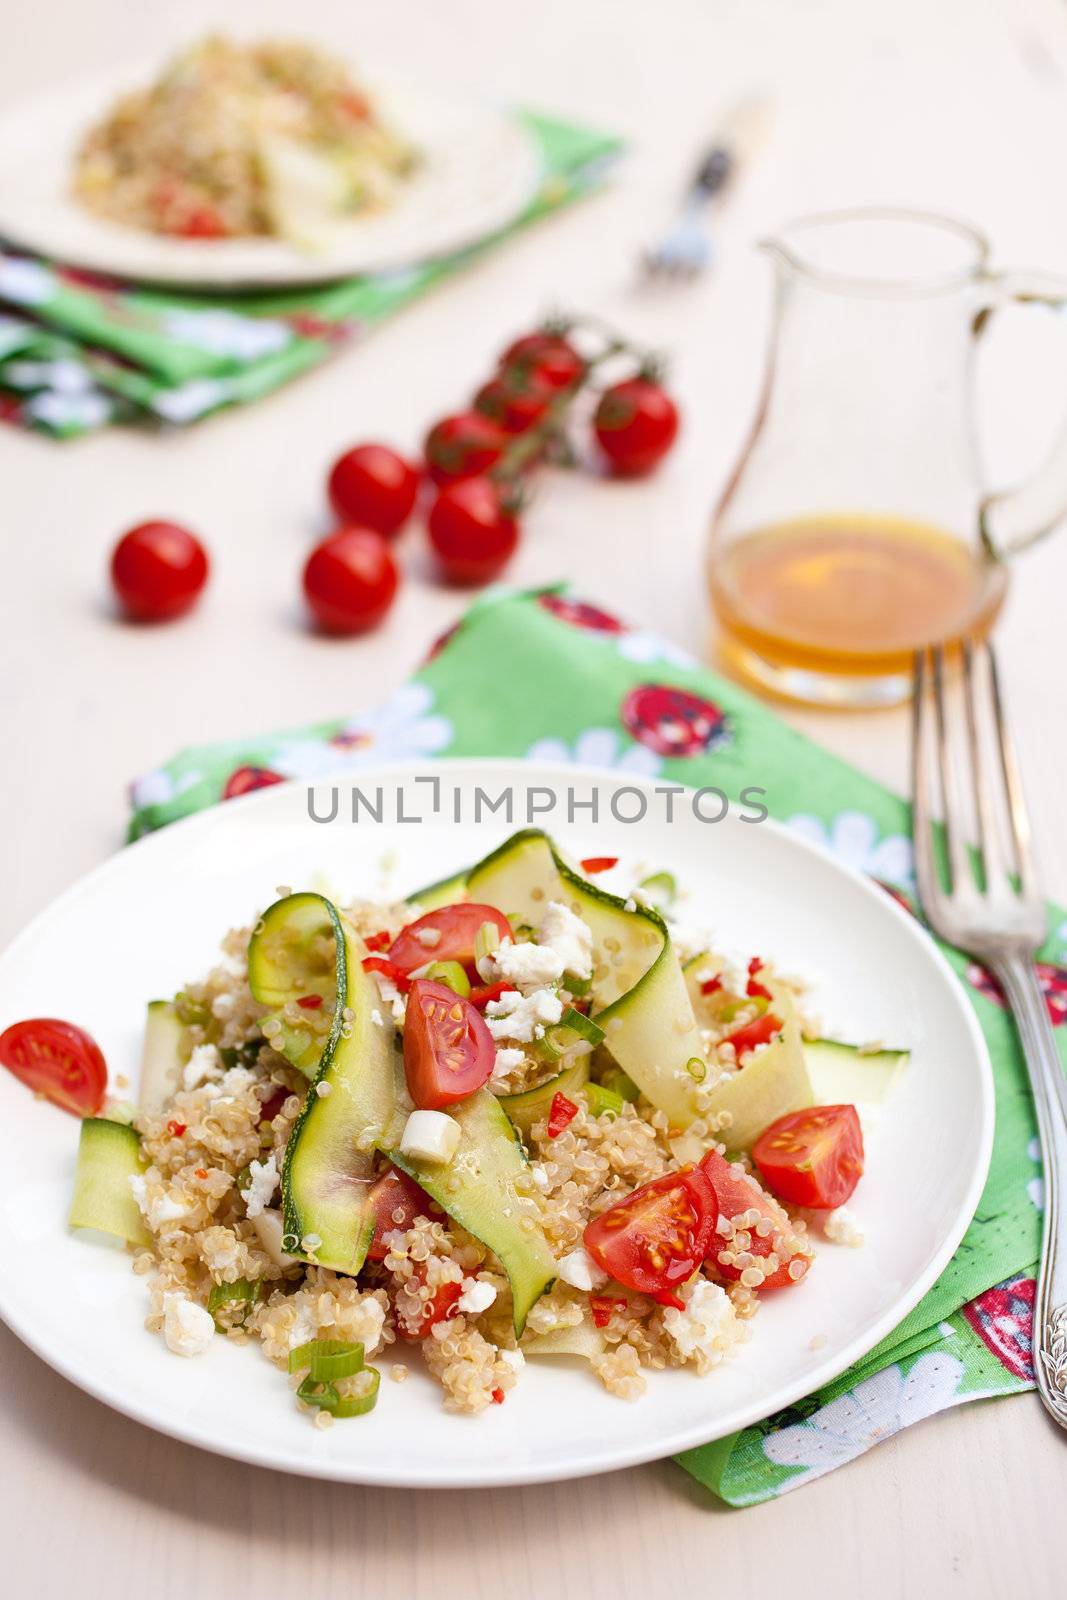 Delicious and fresh salad with quinoa and tomatoes